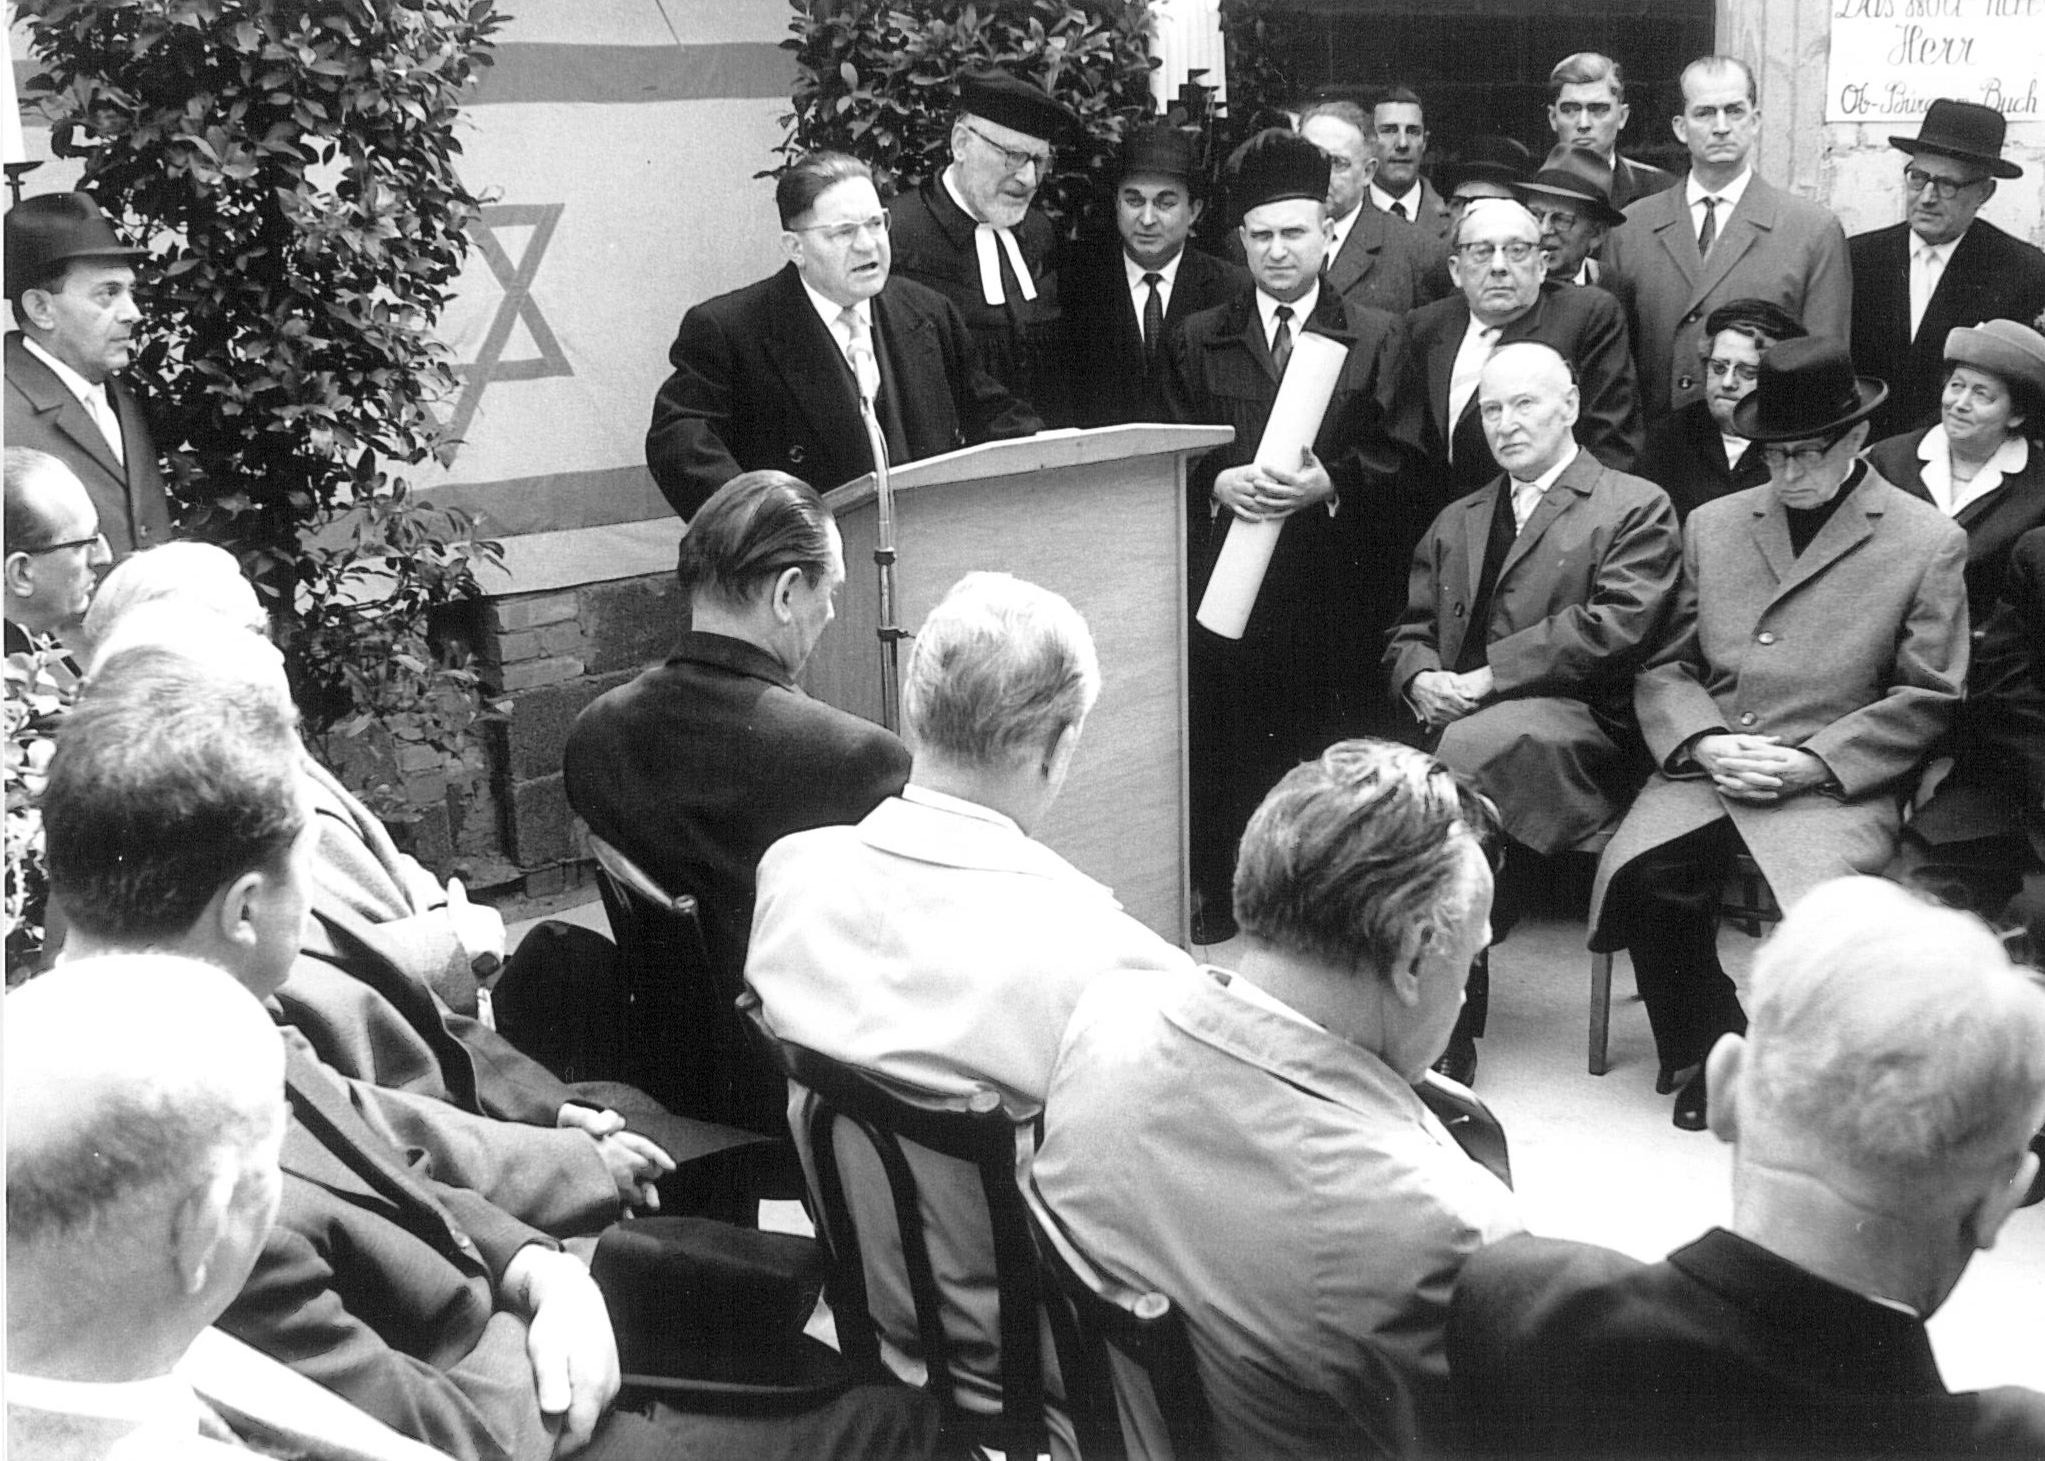 Mayor Georg Buch spoke at the laying of the foundation stone in 1965 as a representative of the state capital Wiesbaden. Collection Jewish Community Wiesbaden